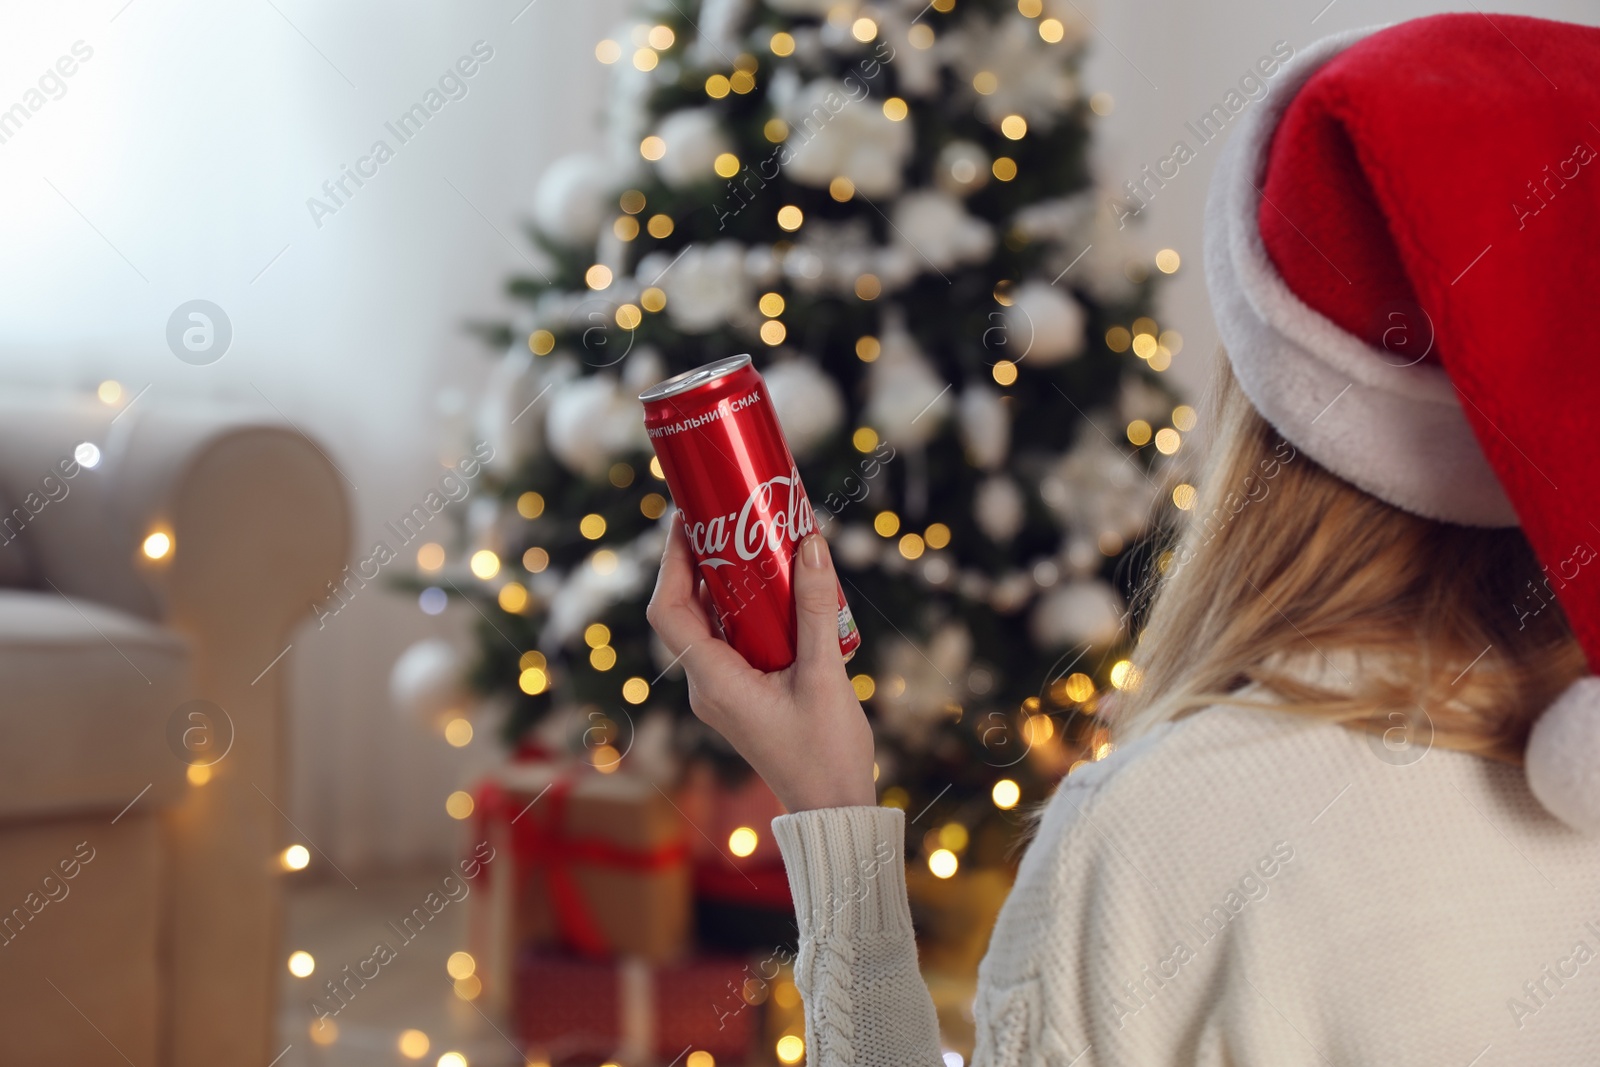 Photo of MYKOLAIV, UKRAINE - January 01, 2021: Woman in Santa hat with can of Coca-Cola against blurred Christmas tree at home, closeup